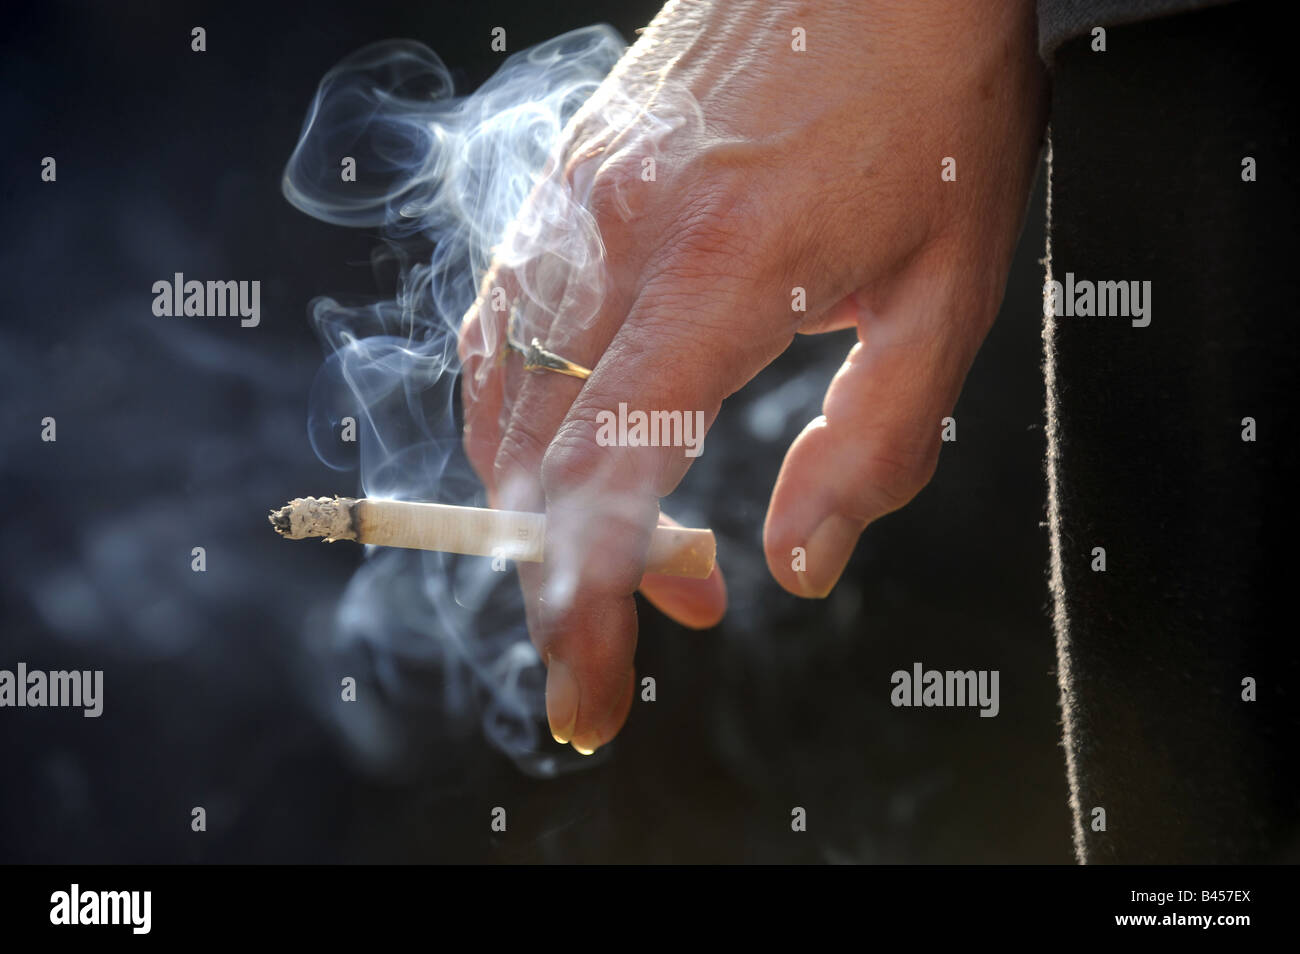 A  LIT CIGARETTE SMOKING IN A WOMANS HAND.RE HEALTH HEALTHY LIFESTYLE LUNG DISEASE LUNGS SMOKERS HOSPITALS UK CANCER Stock Photo